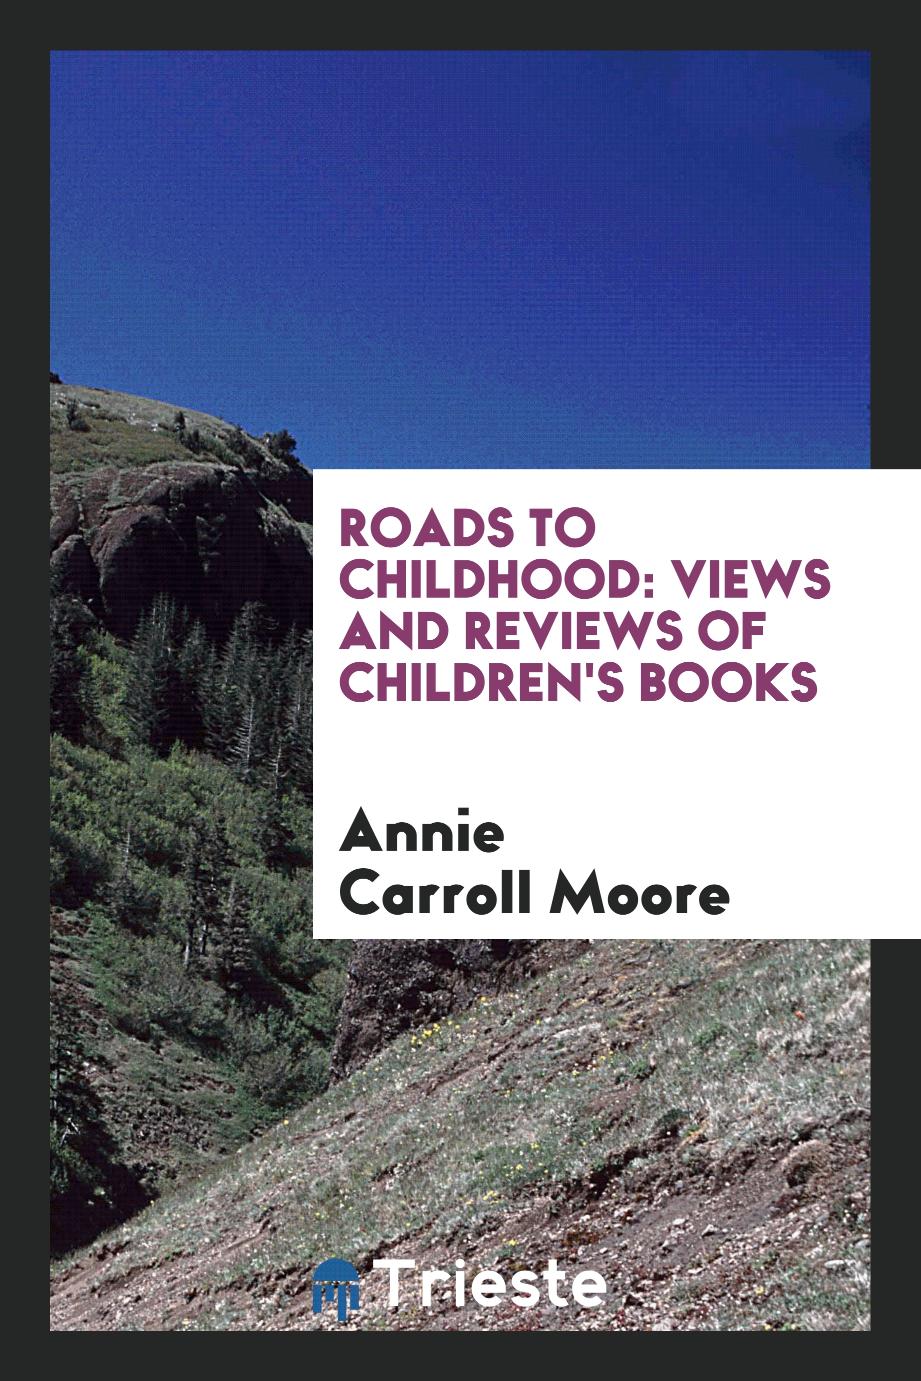 Roads to childhood: views and reviews of children's books